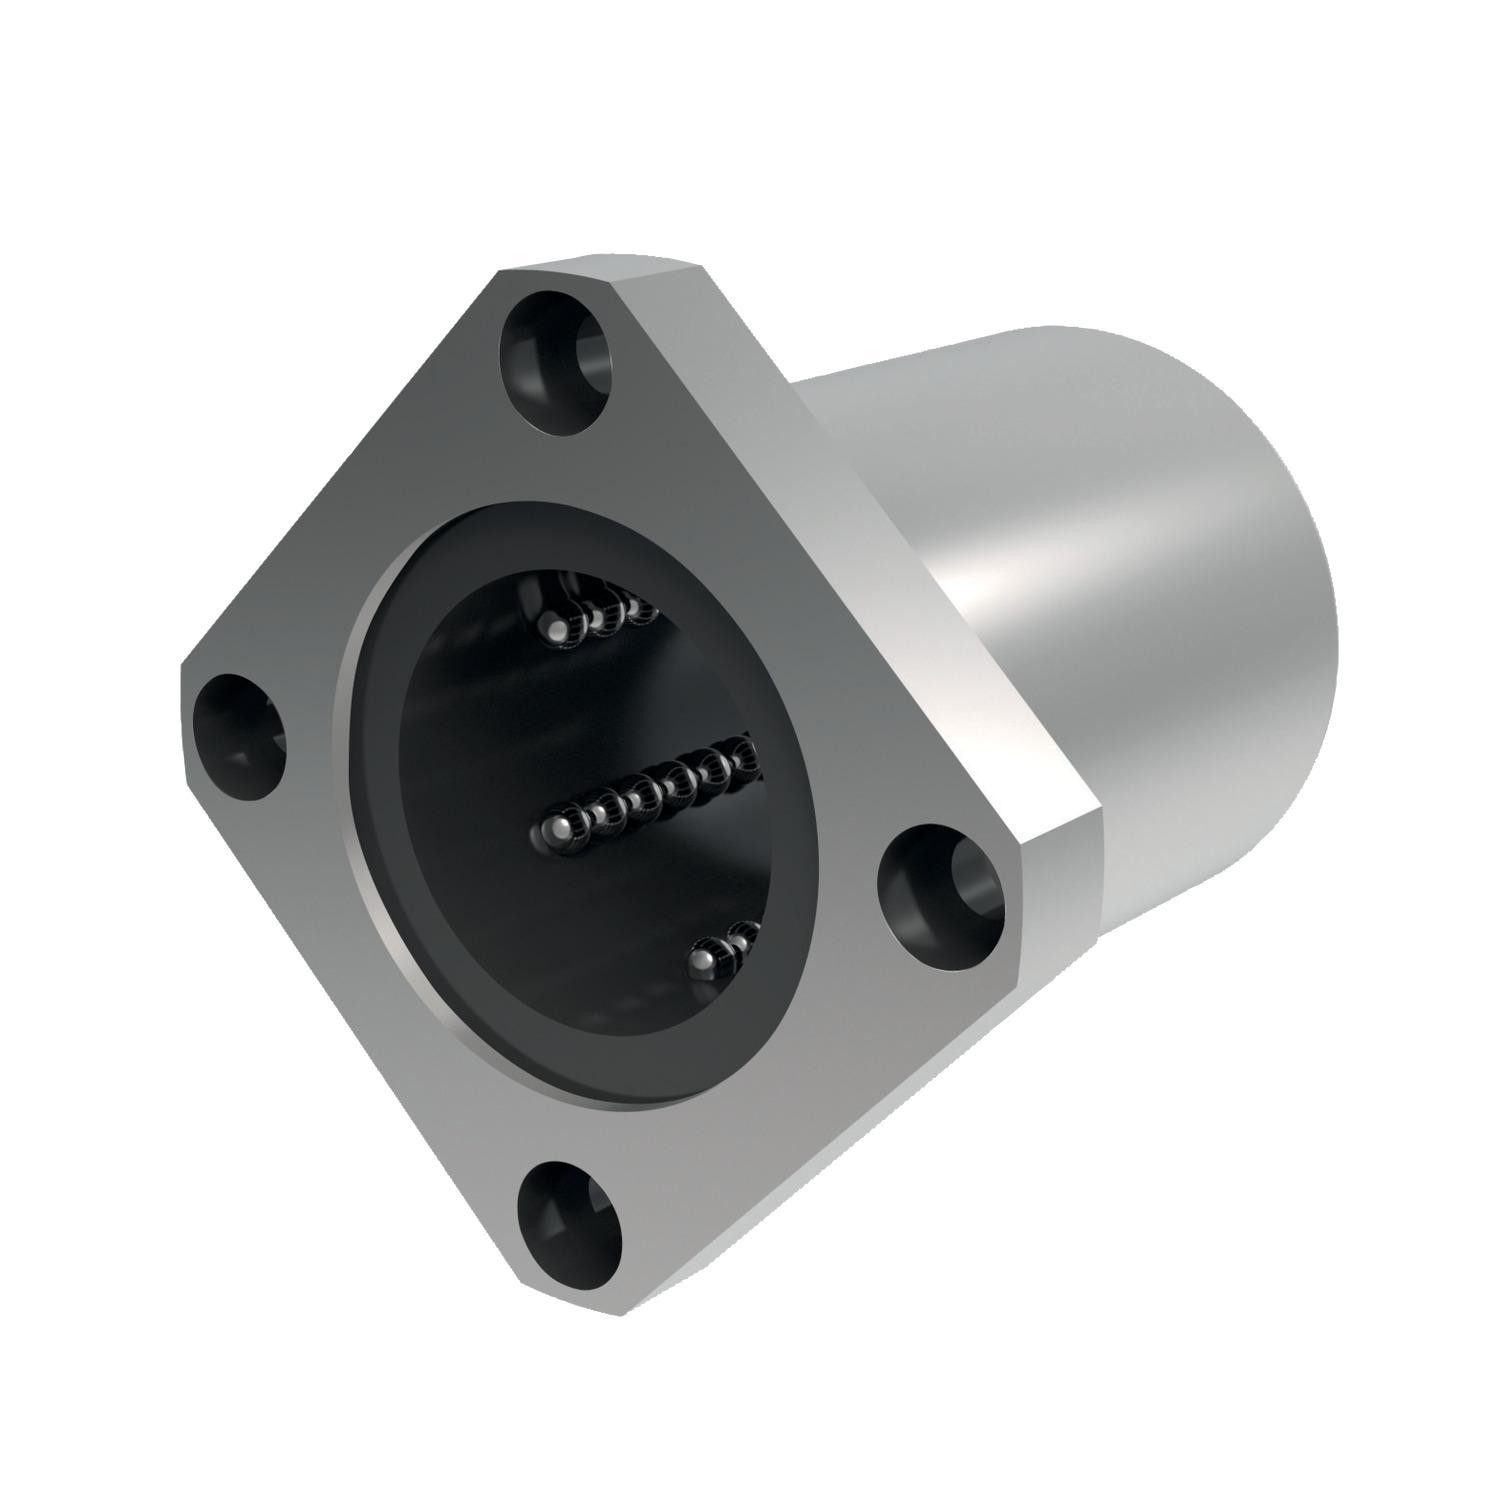 Product L1719, Flanged Linear Ball Bushings square flange / 